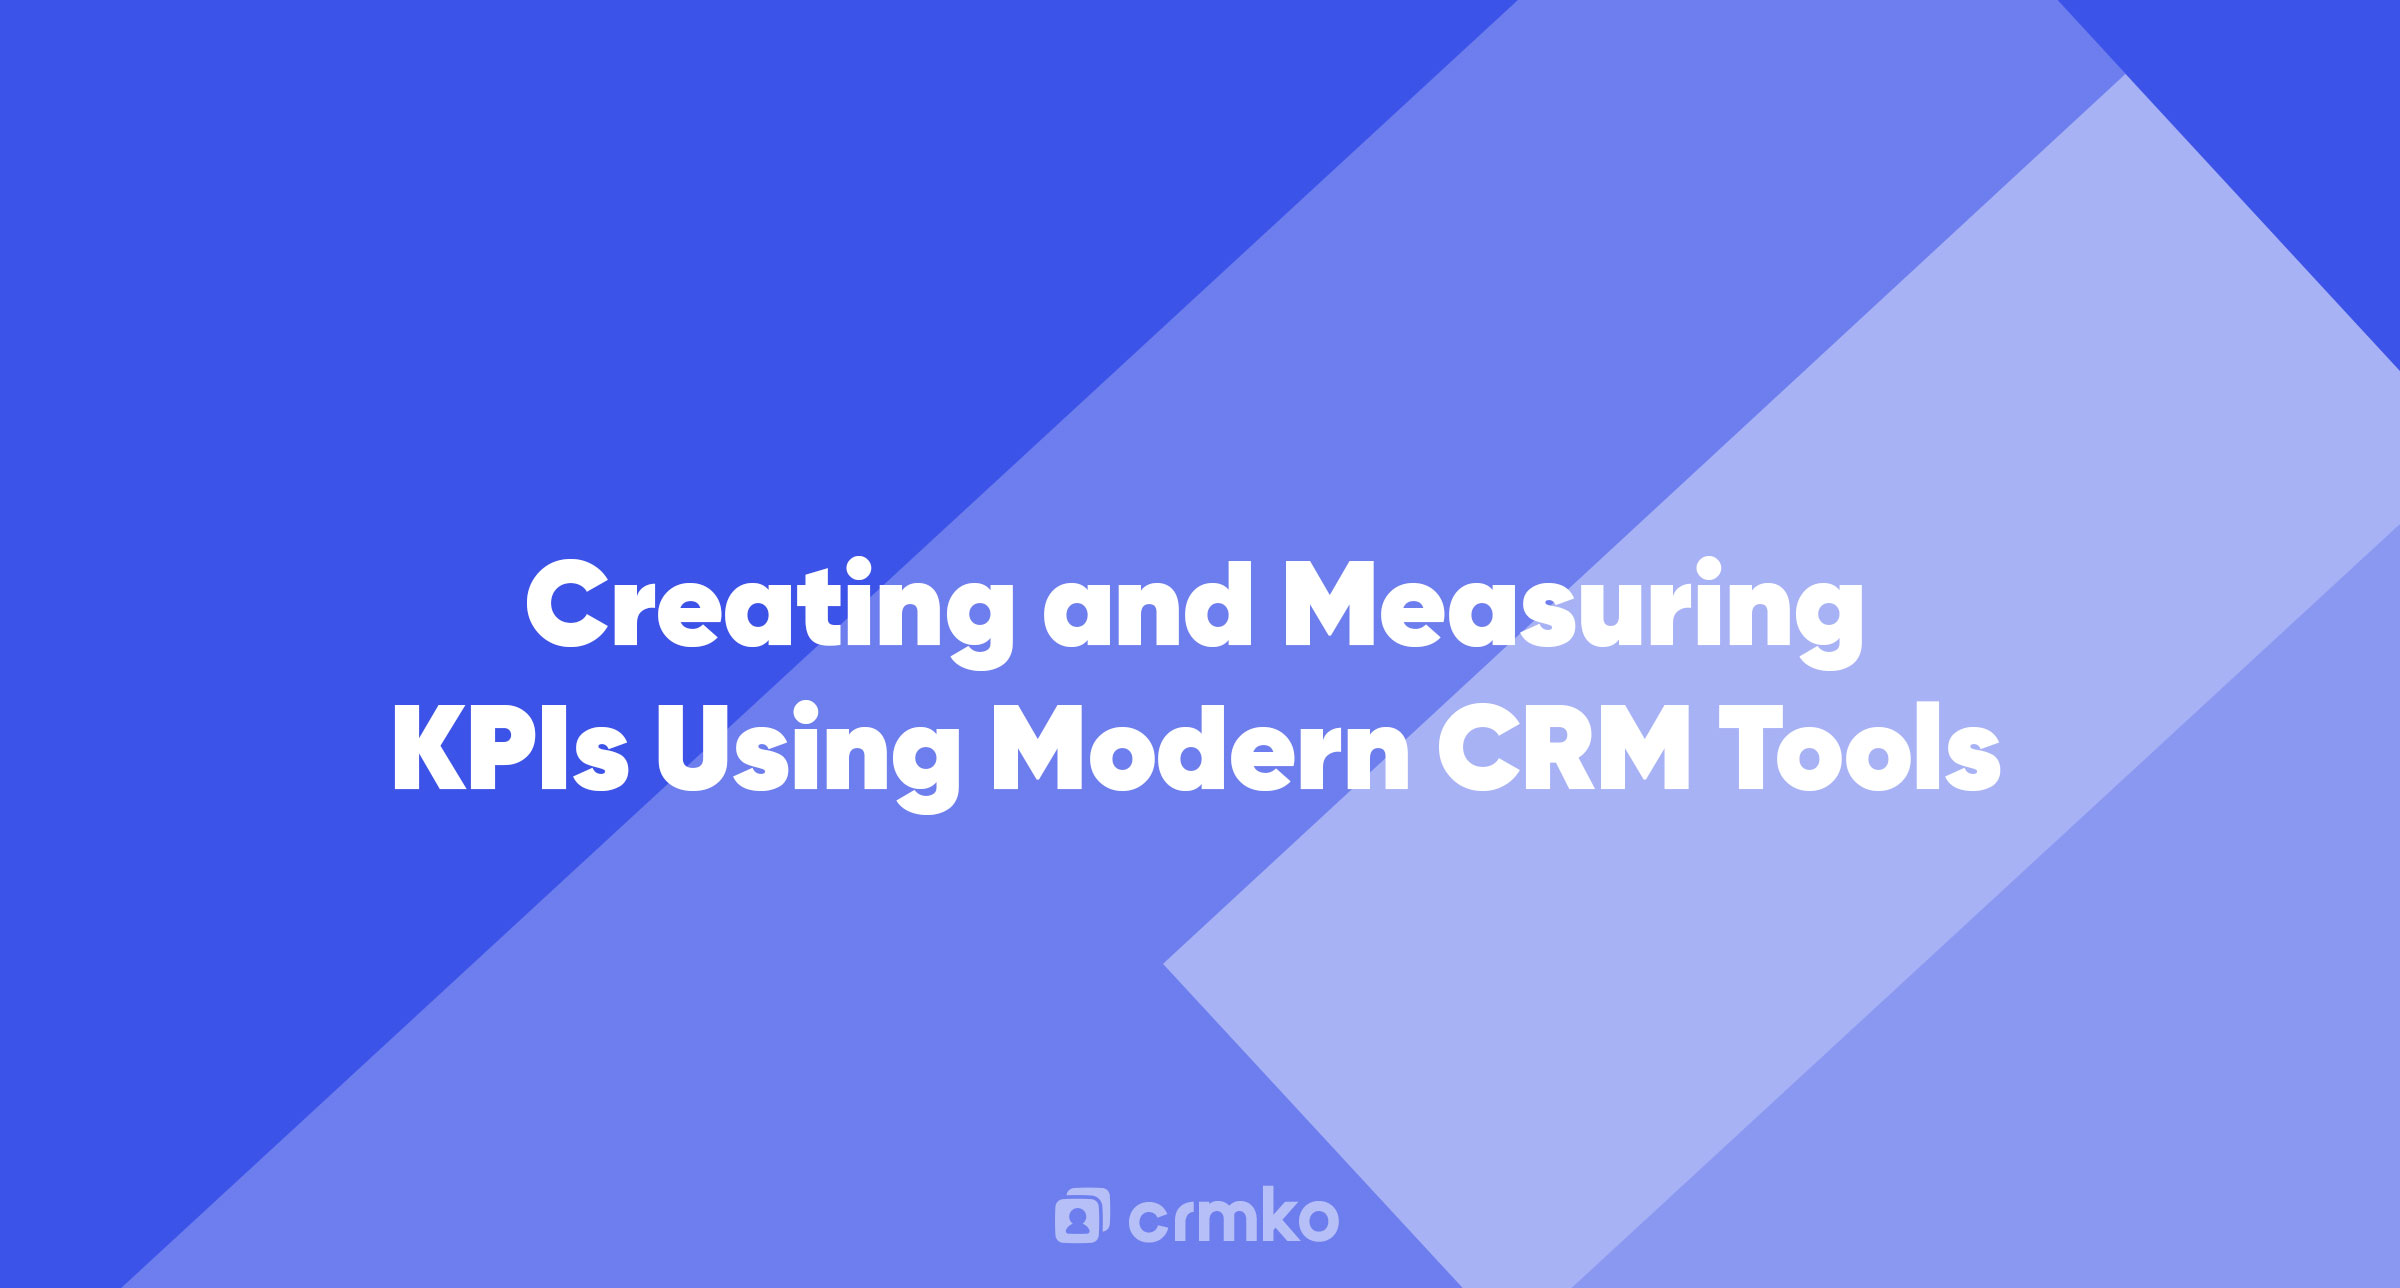 Article | Creating and Measuring KPIs Using Modern CRM Tools